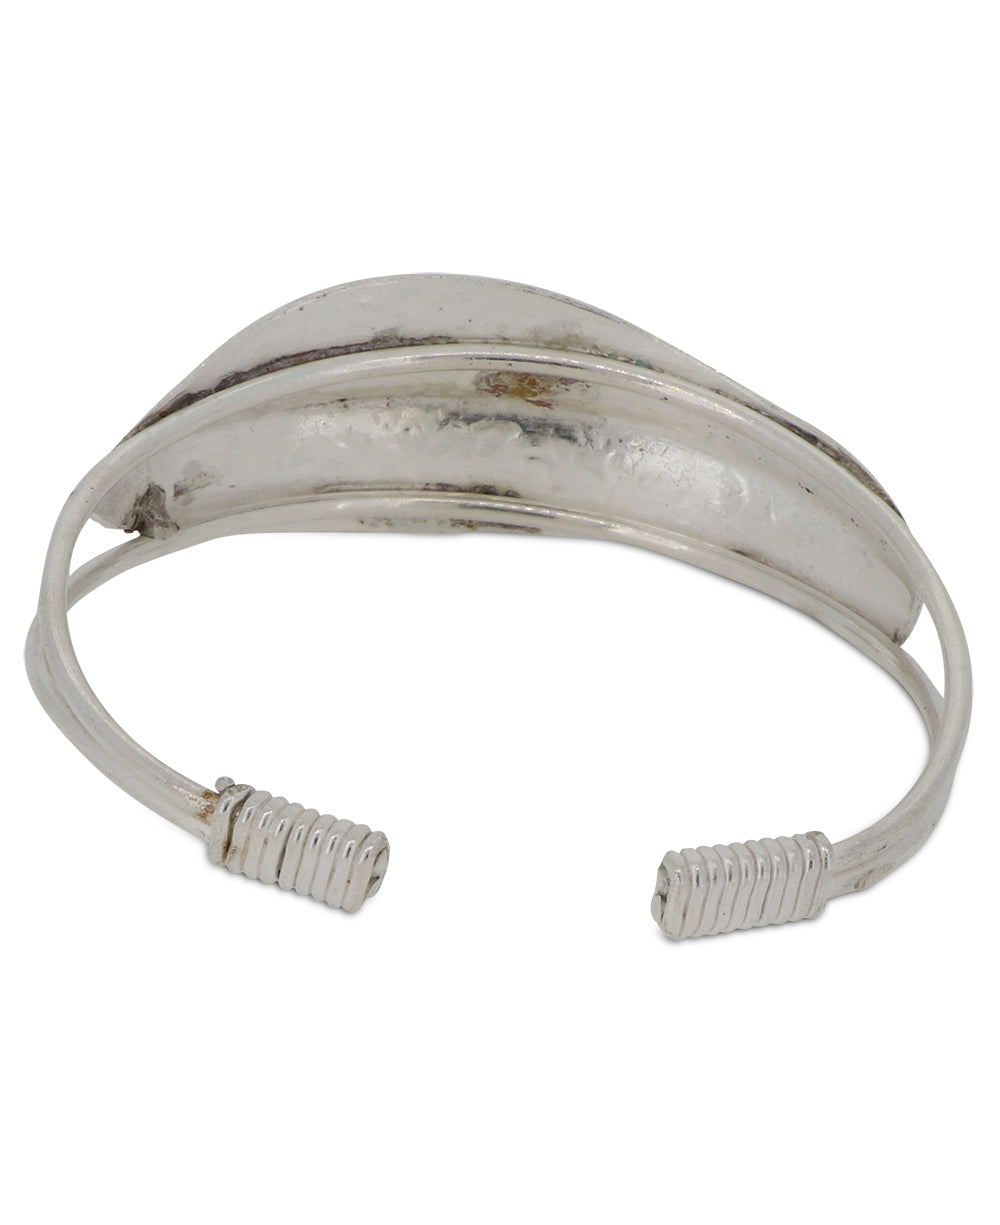 Back view of the Handcrafted Thai Hilltribe Silver Fish Bracelet